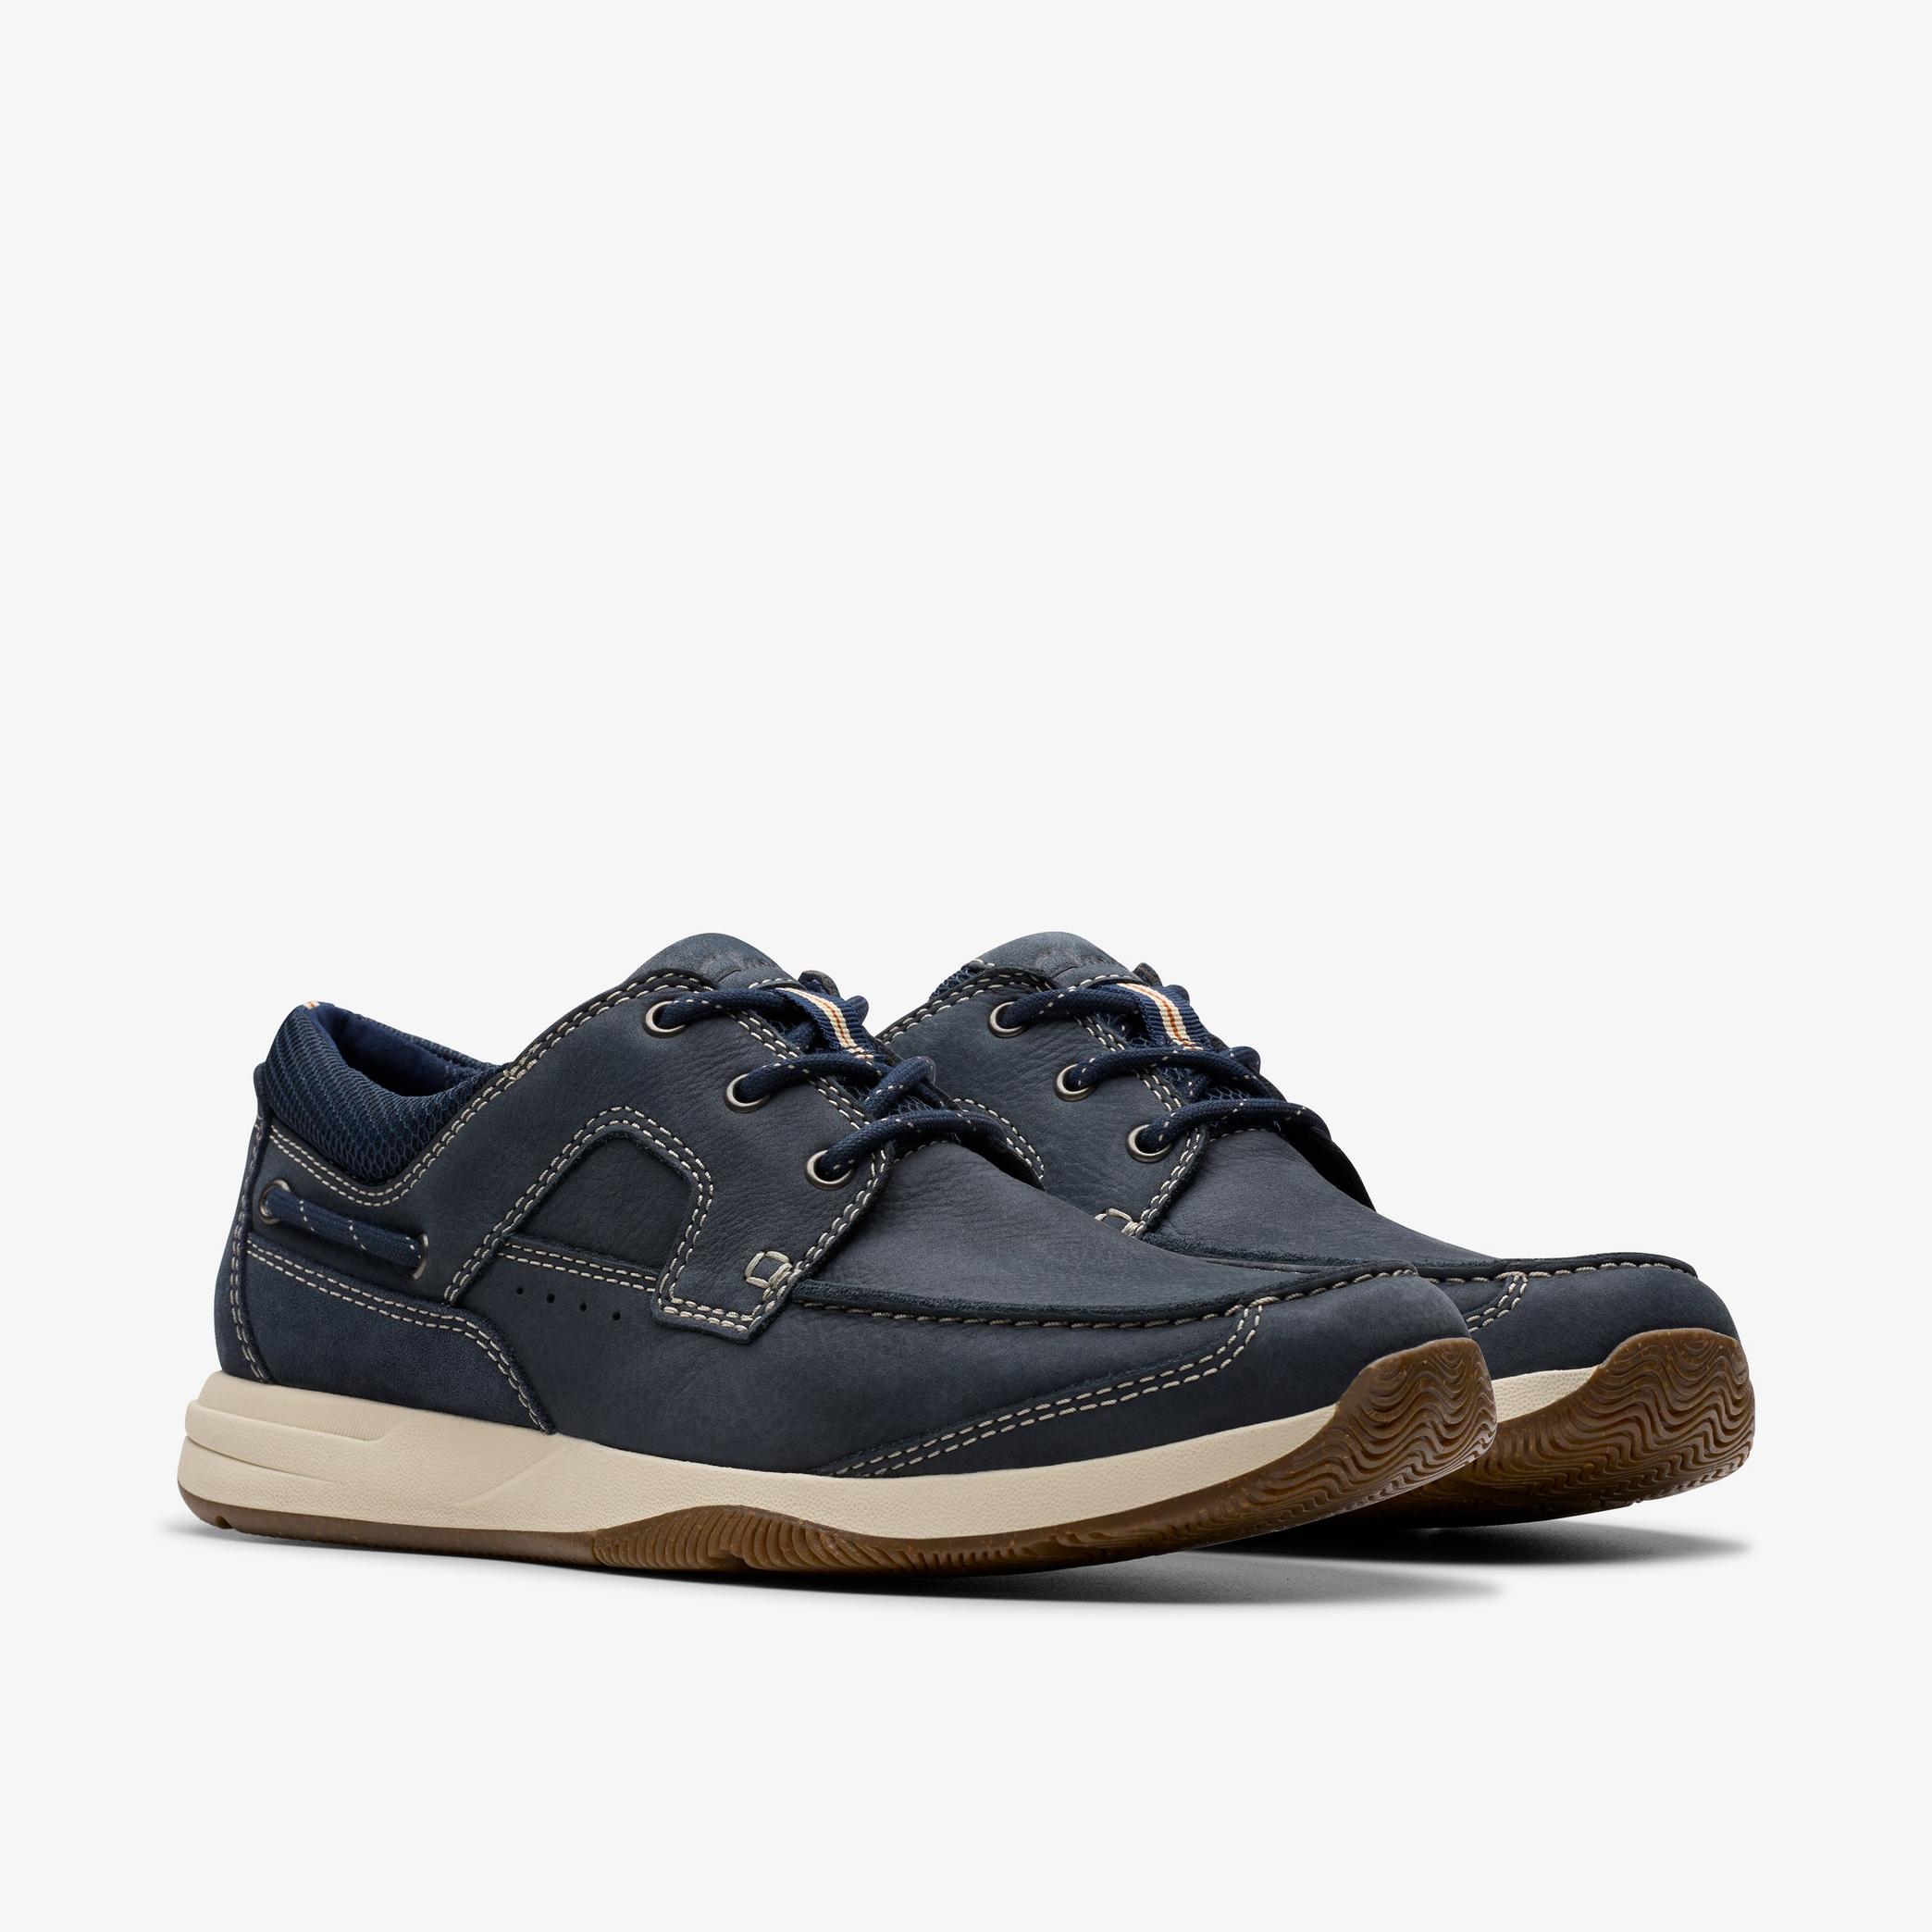 Sailview Lace Navy Nubuck Boat Shoes, view 5 of 8